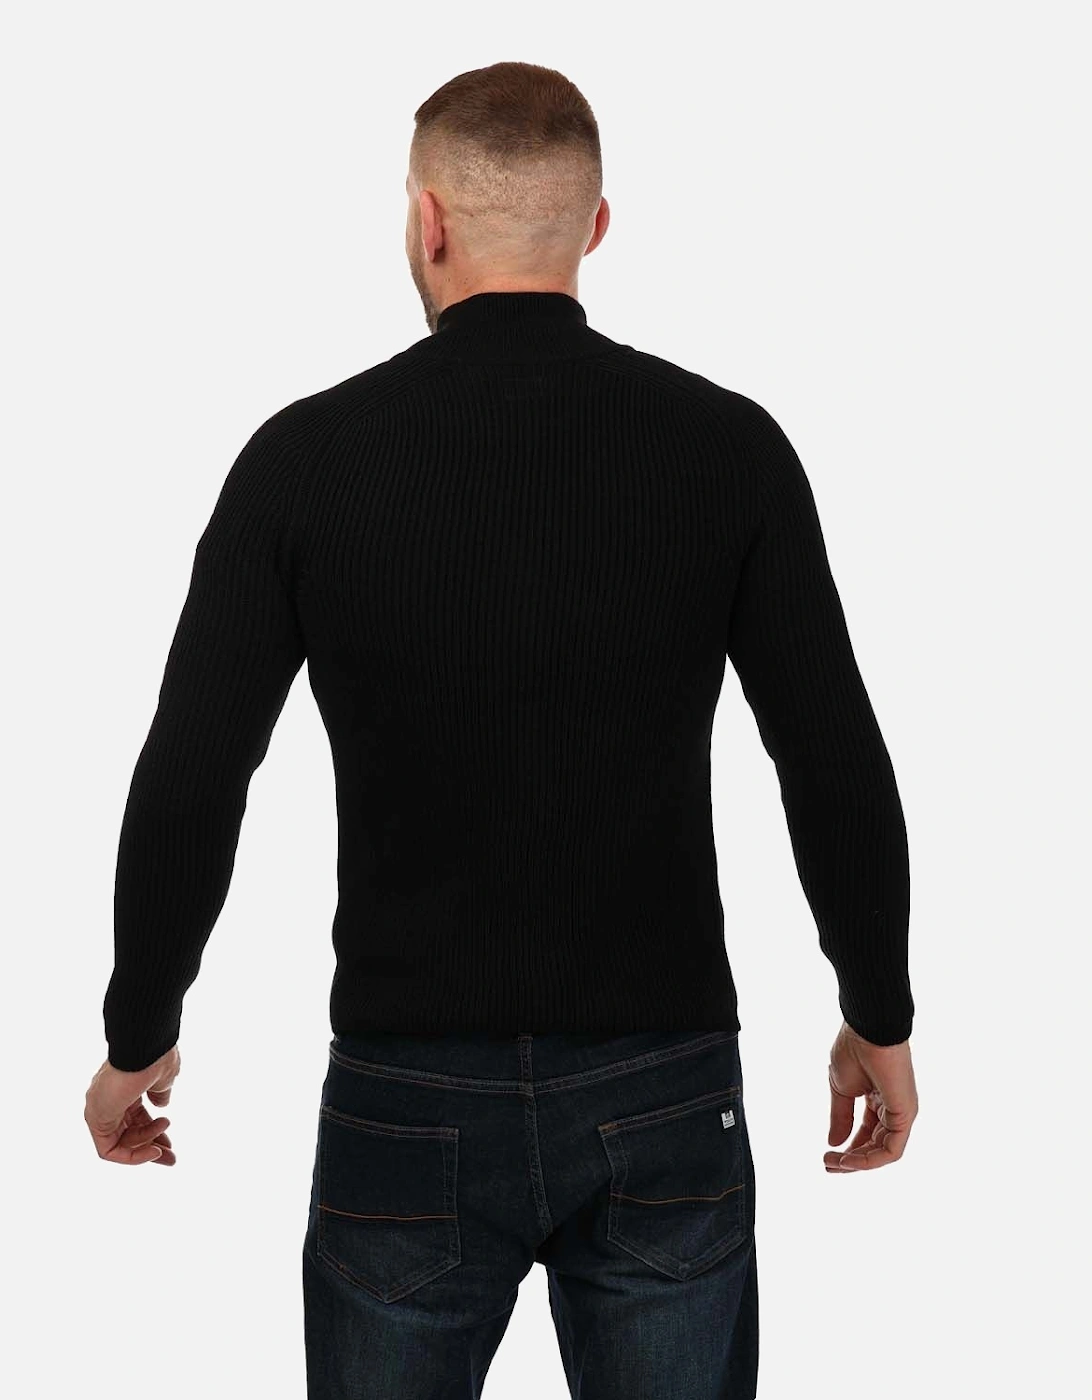 Mens Re-Wool Zipped Knitted Jumper